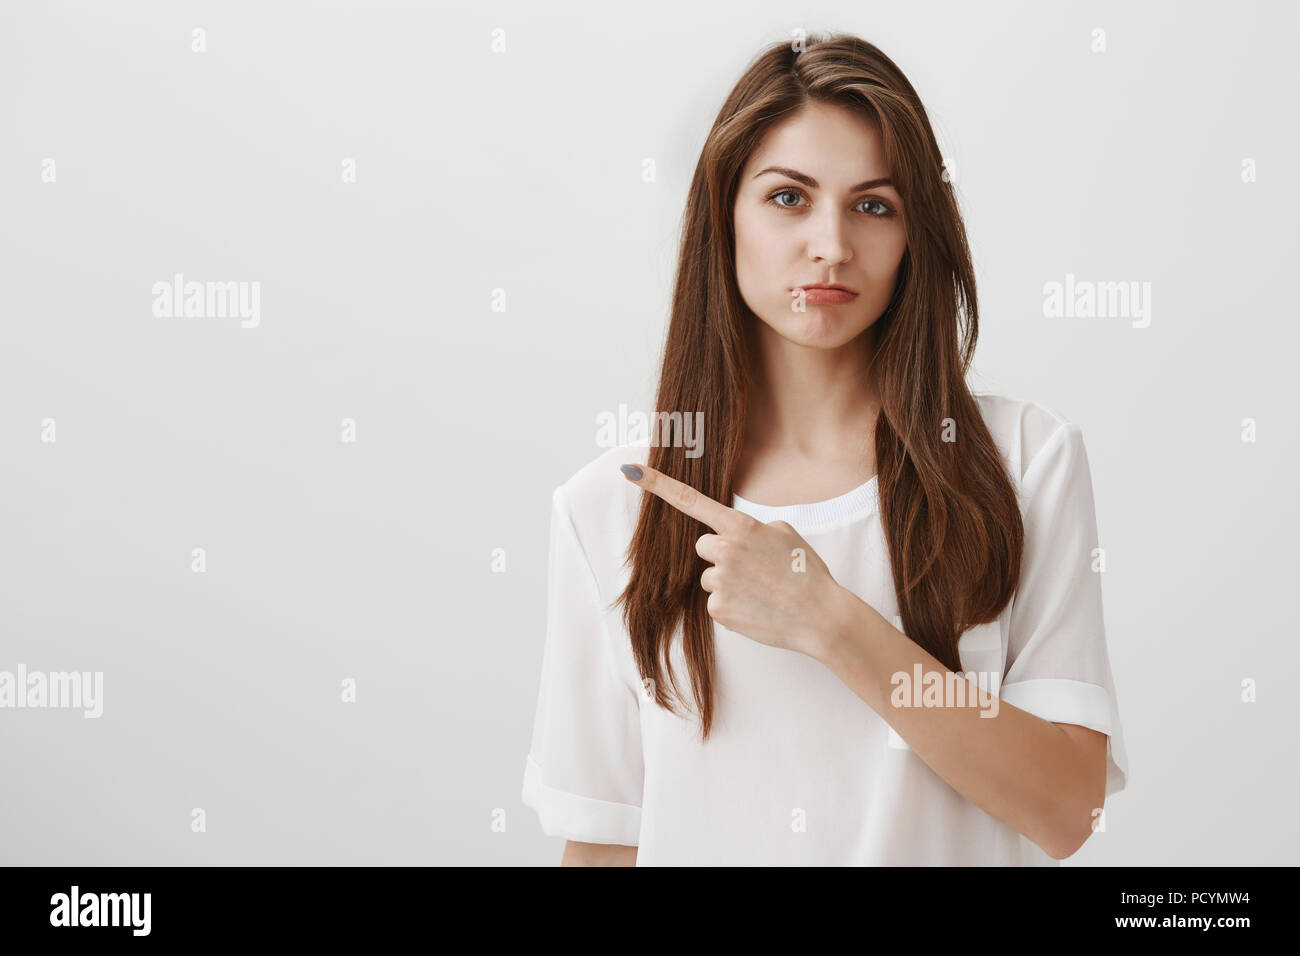 Extremely jealous girlfriend indicating at purse she wants as present. Portrait of attractive brunette girl pointing left and sulking, expressing regr Stock Photo